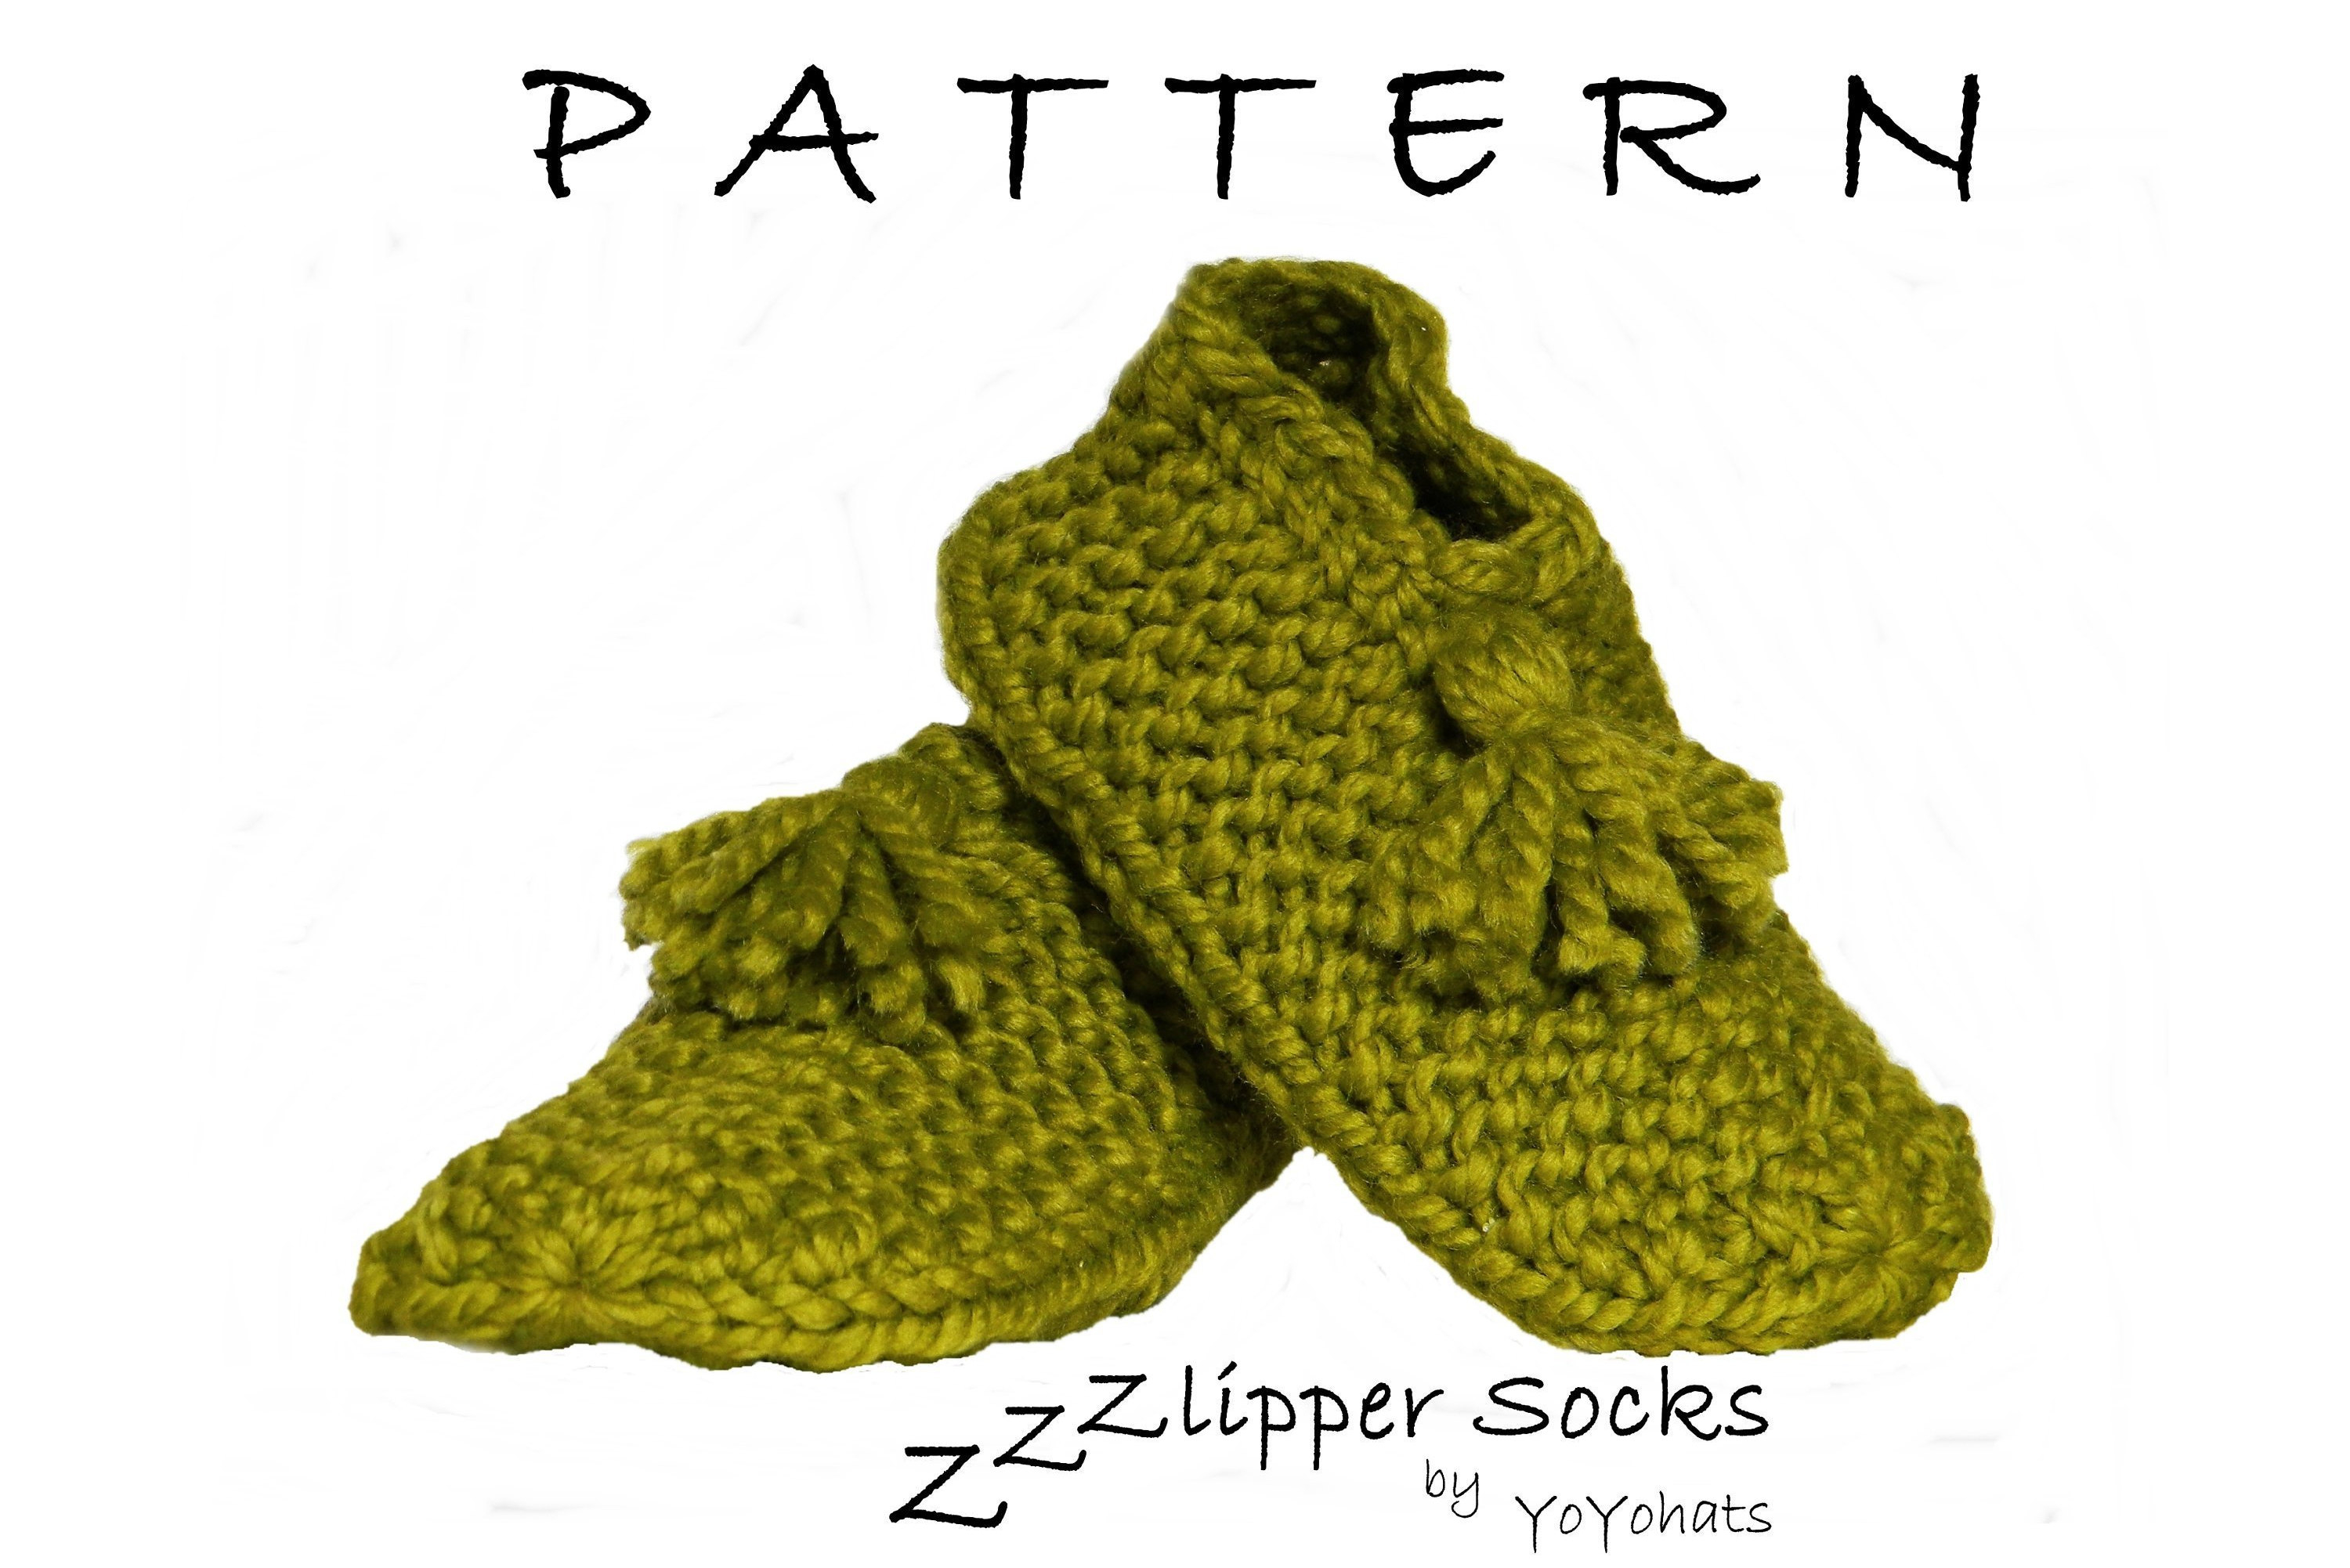 Knitted Slipper Patterns Knitted Slippers Patterns 3 Sizes Adult S M L Xl Instructions For Knitted Slippers Cozies Easy Slipper Pattern Gift Christmas